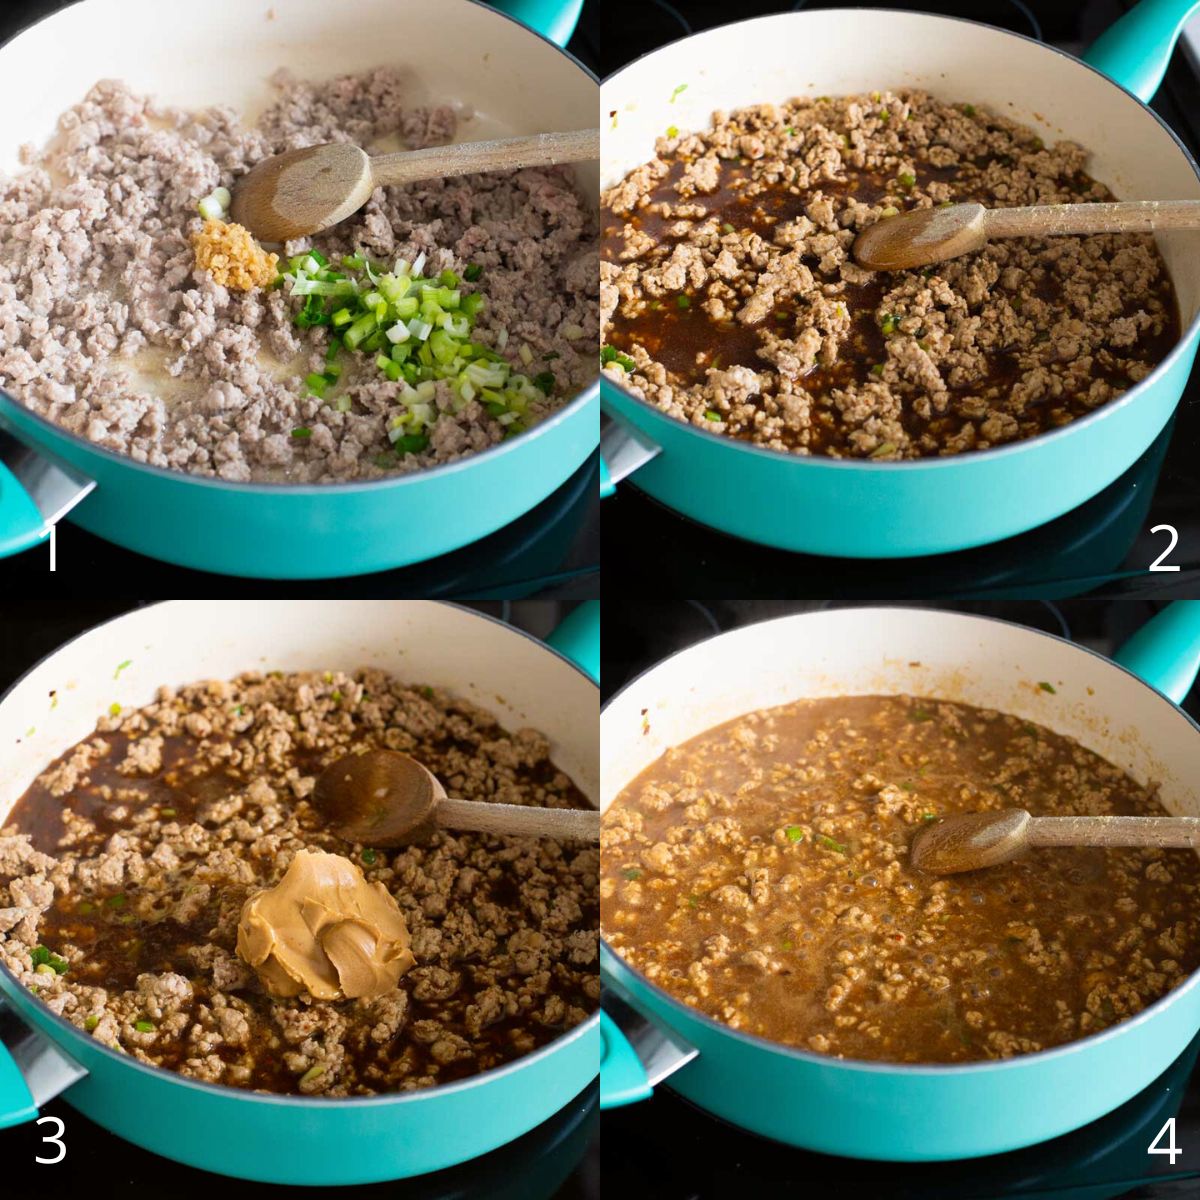 The step by step photos show how to brown the pork and build the spicy peanut sauce.